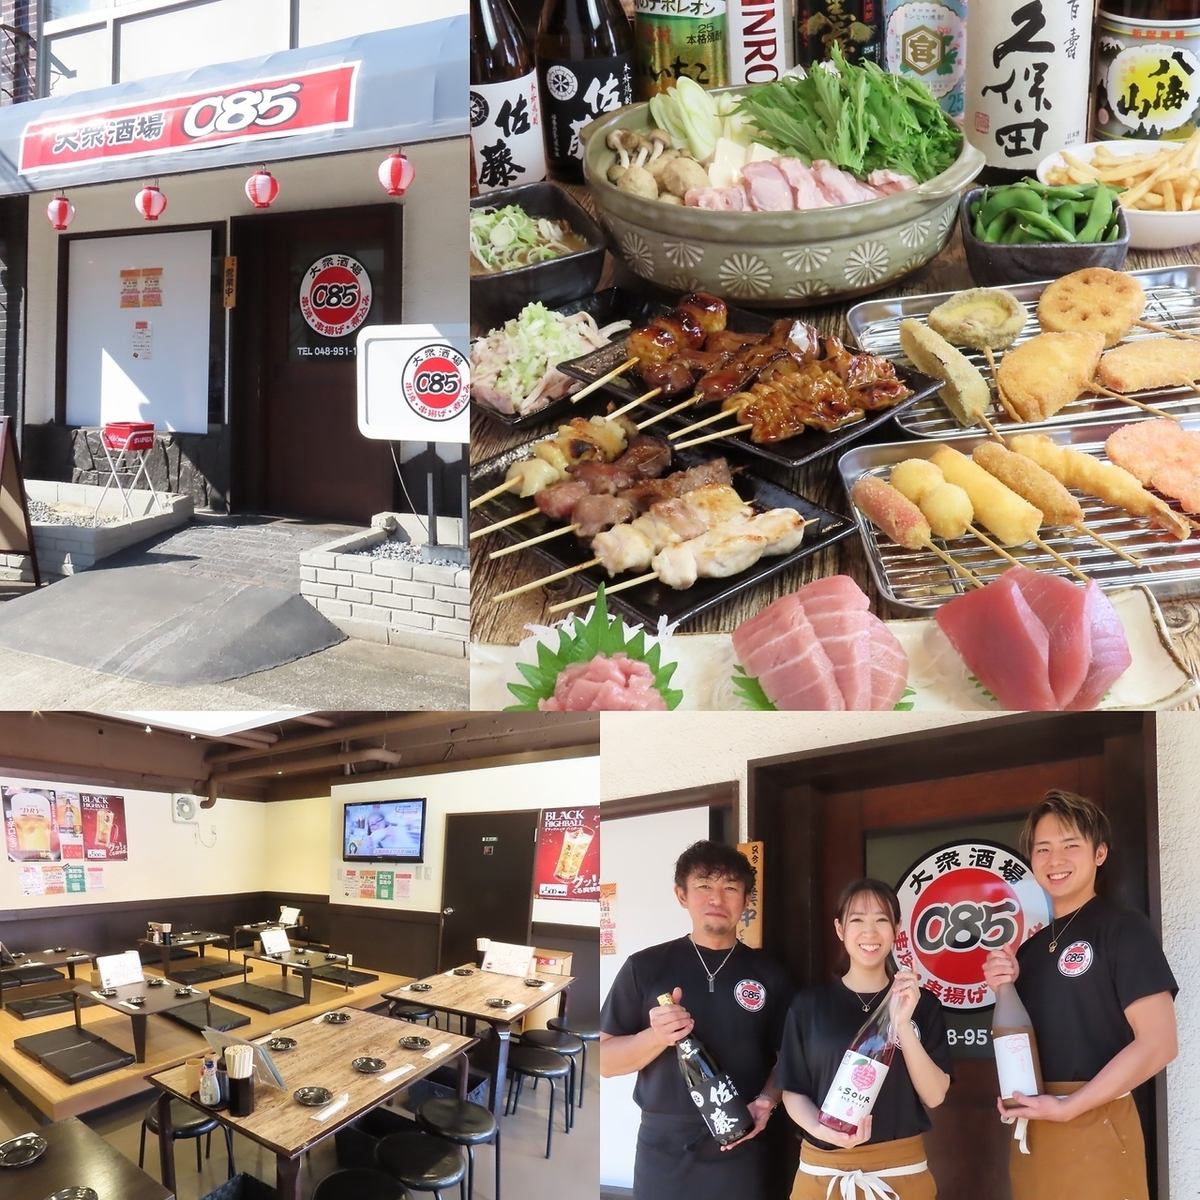 Enjoy the skewers and skewers prepared in-house along with alcohol! We're located right next to Dokkyo University!